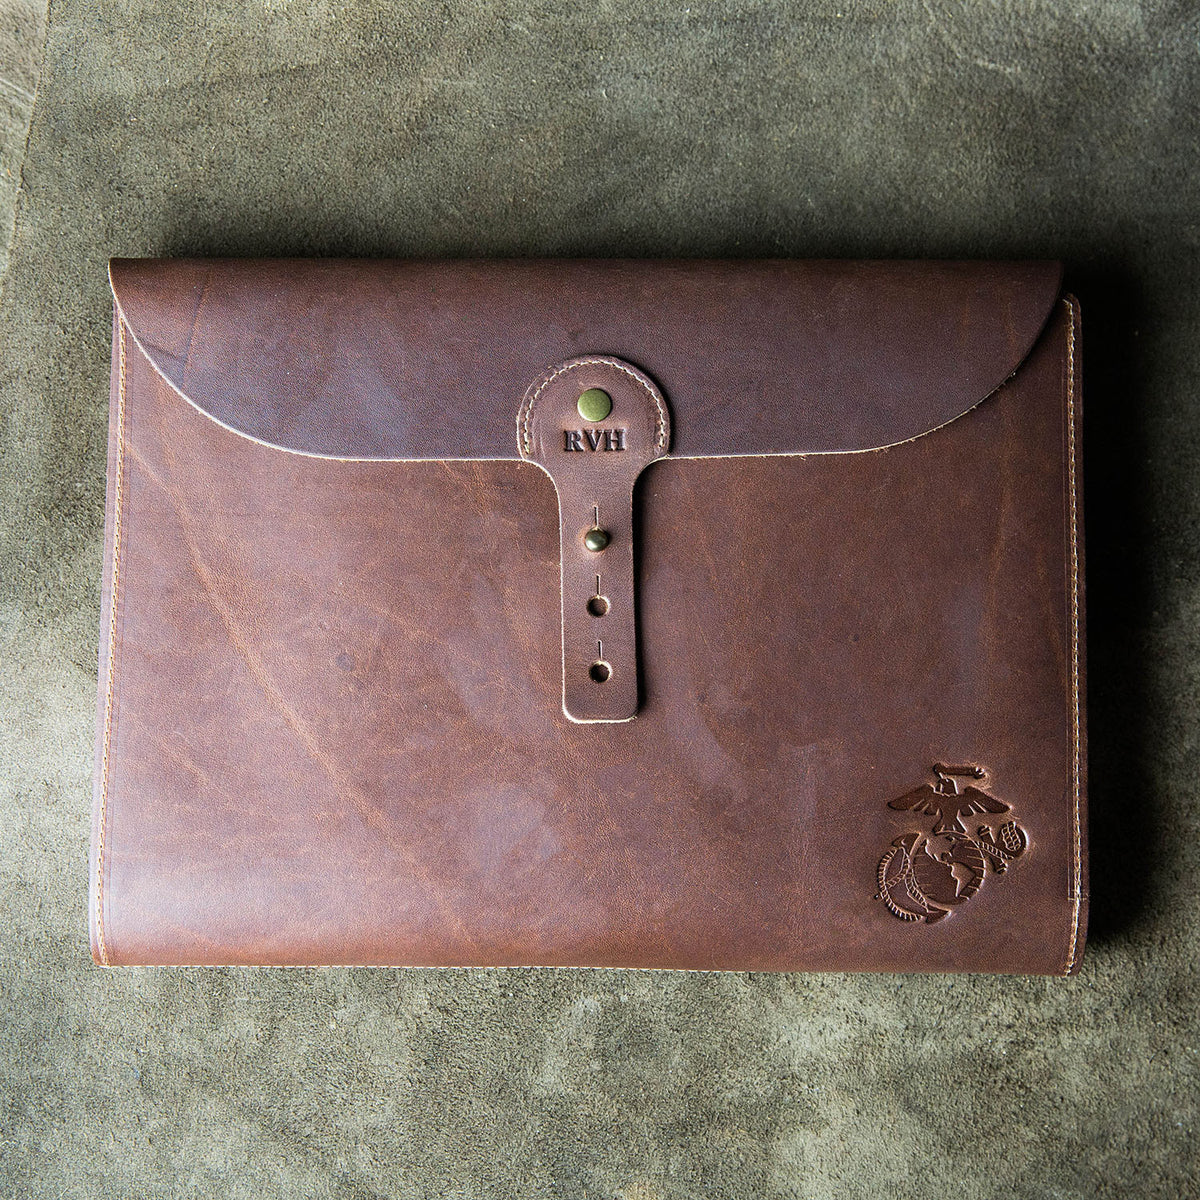 Fine Leather A4 moleskin journal cover with personalized initials and Marine Corps logo